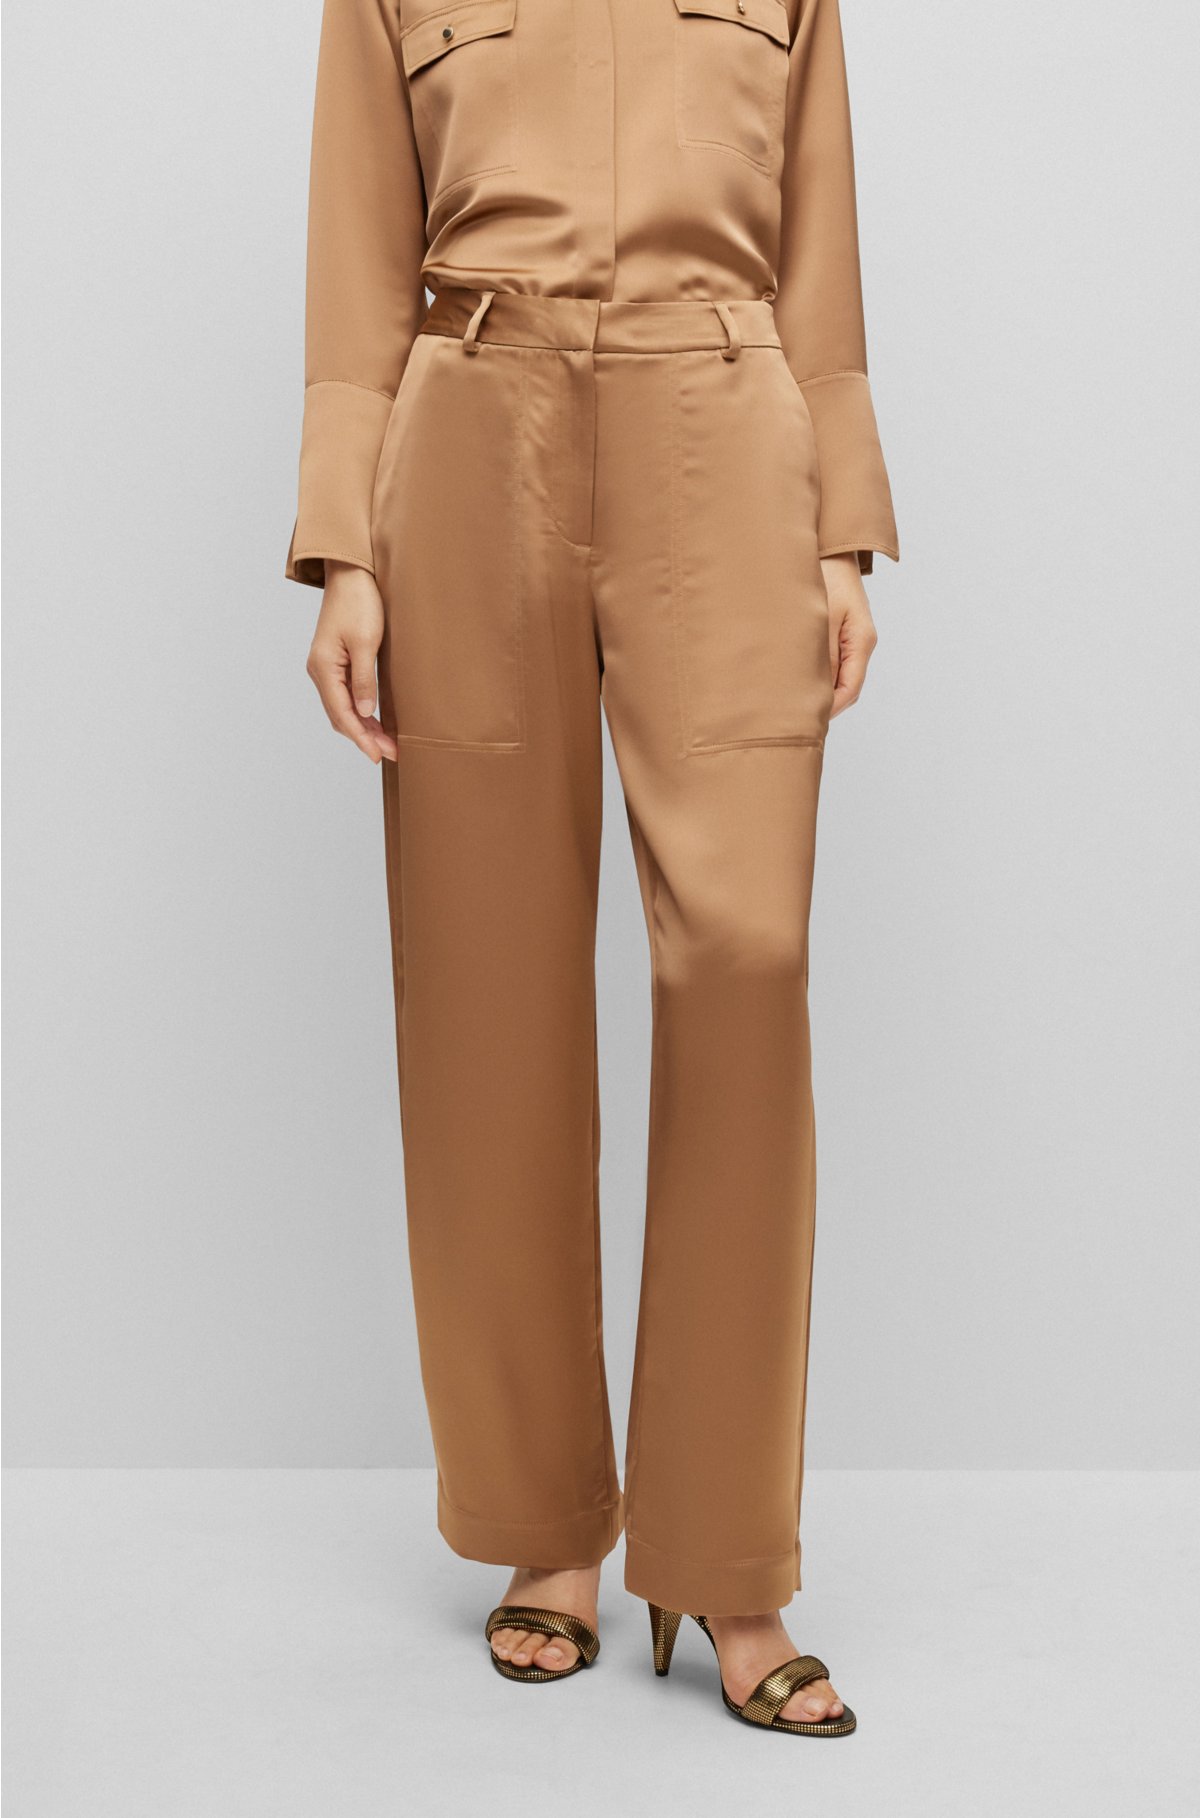 BOSS - Relaxed-fit trousers in heavyweight satin